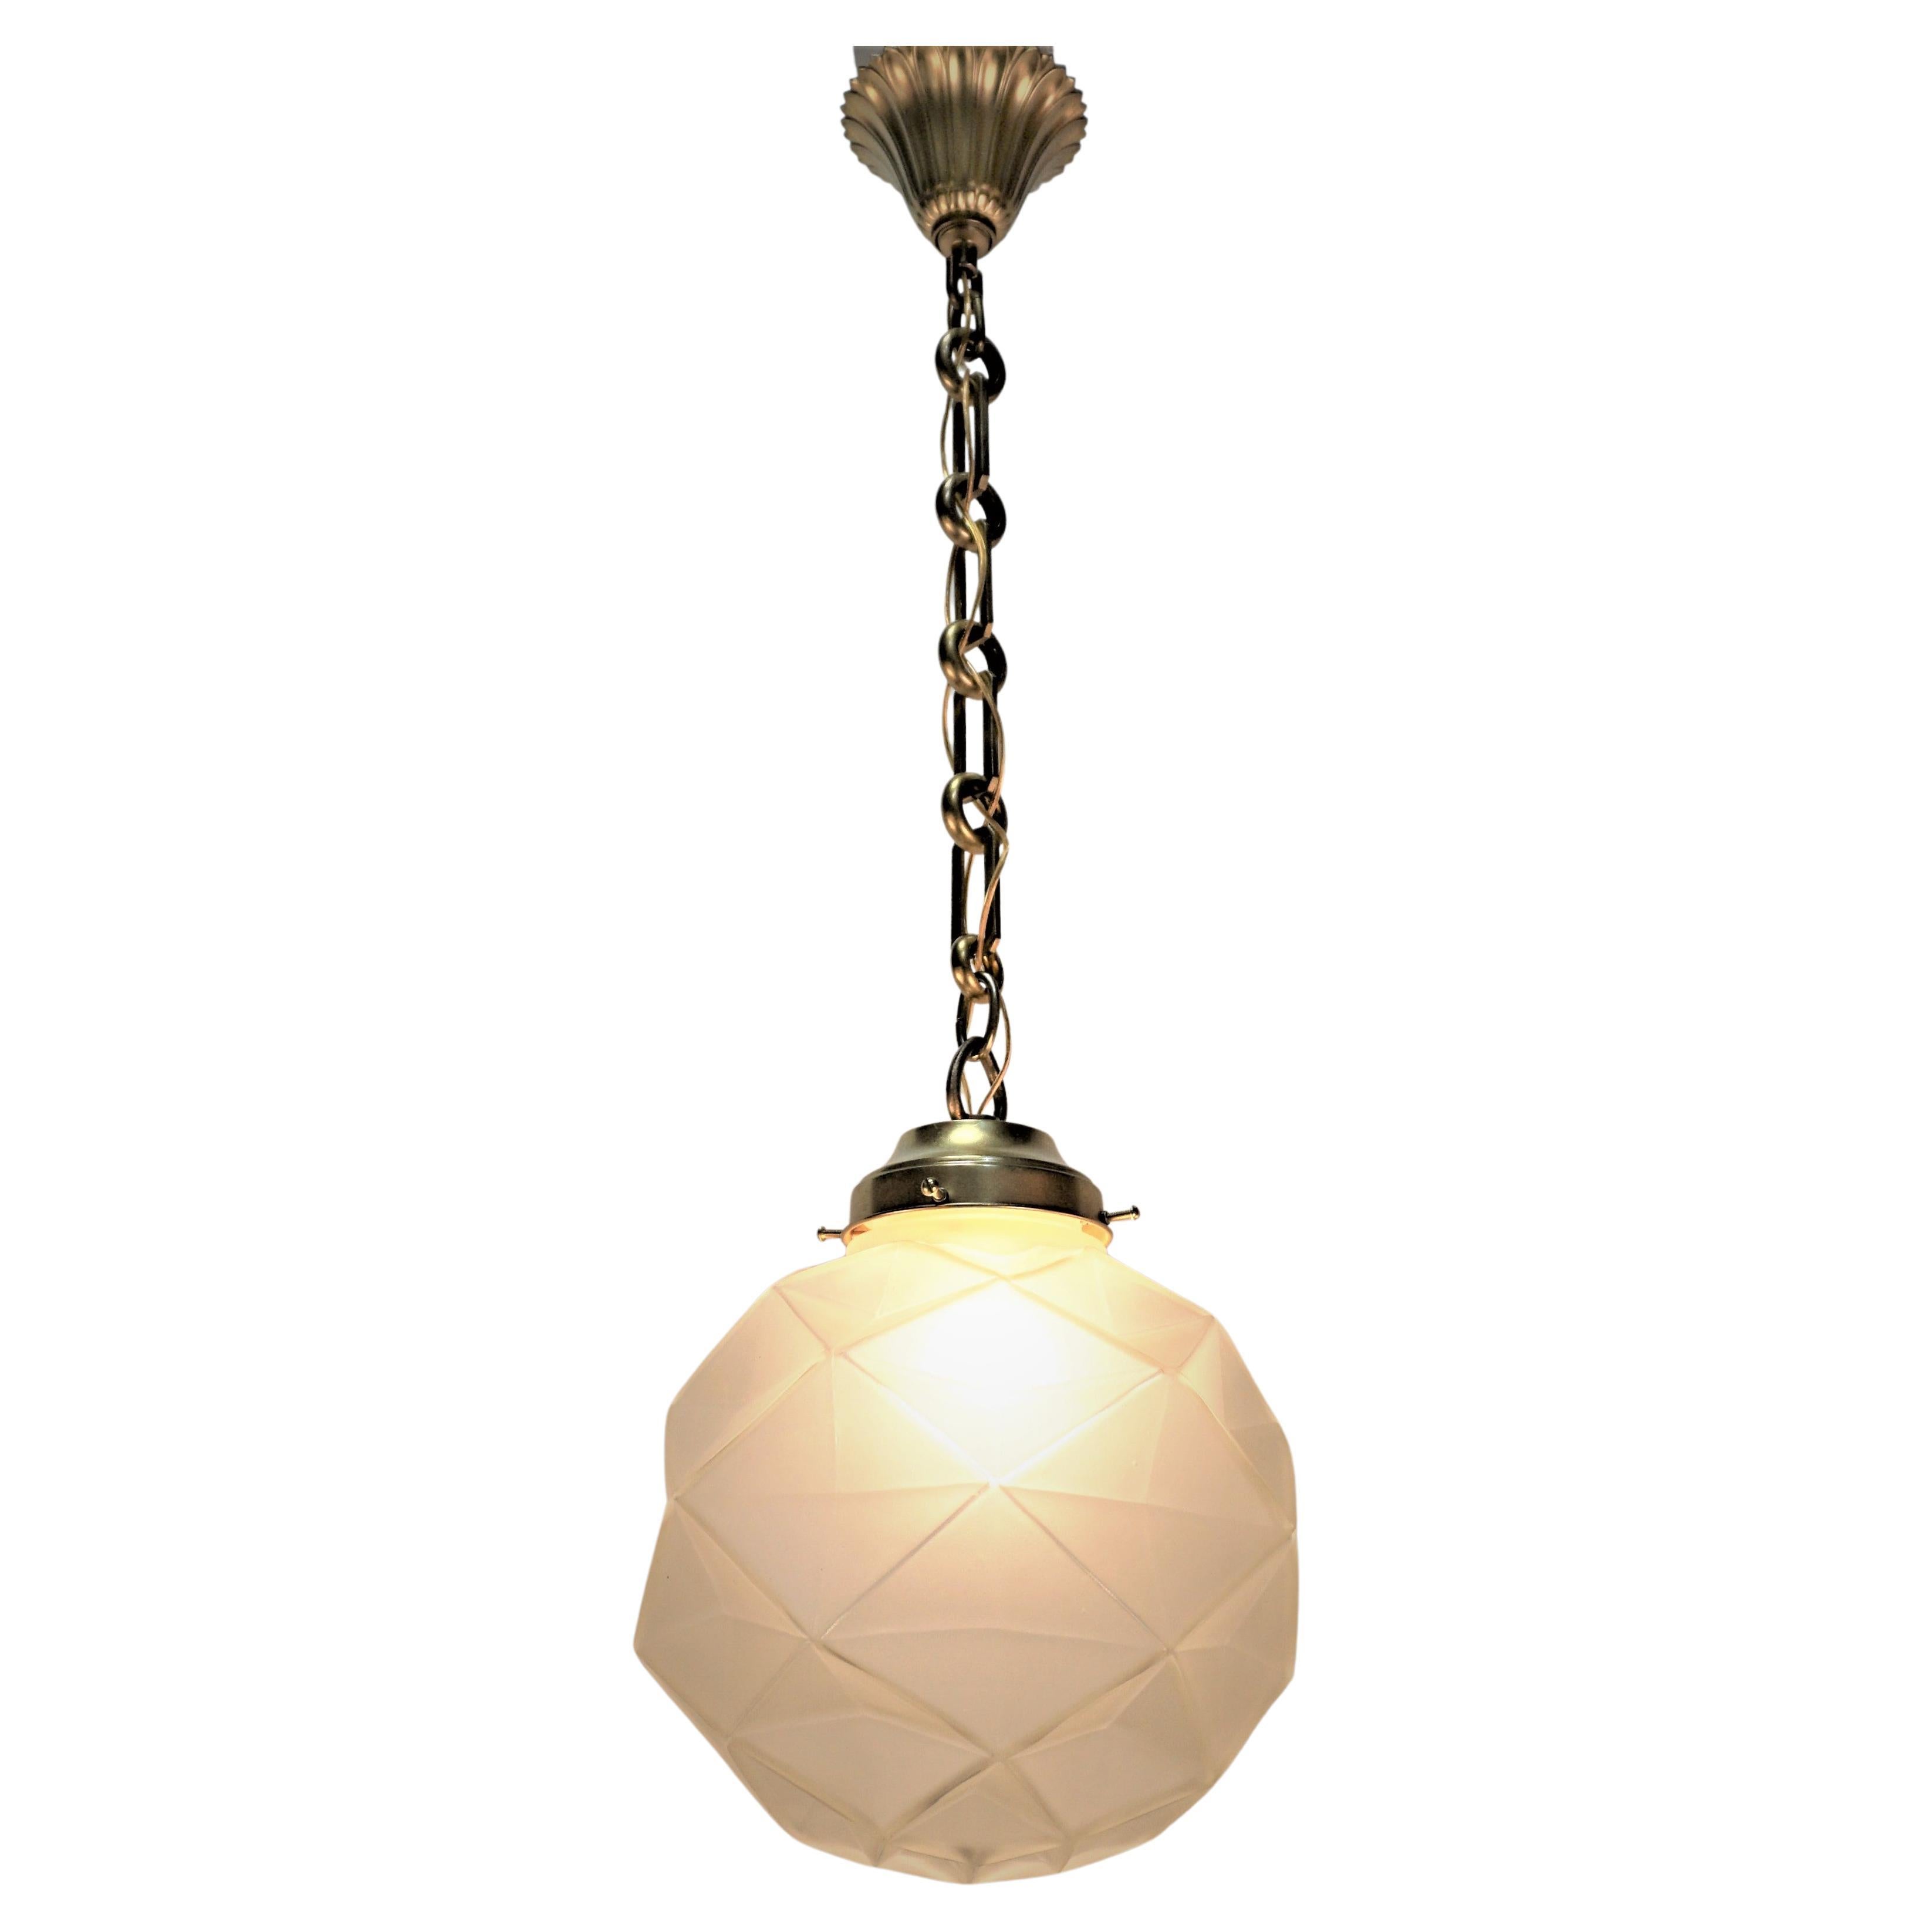 French Art Deco Golbe Pendent/Chandelier For Sale